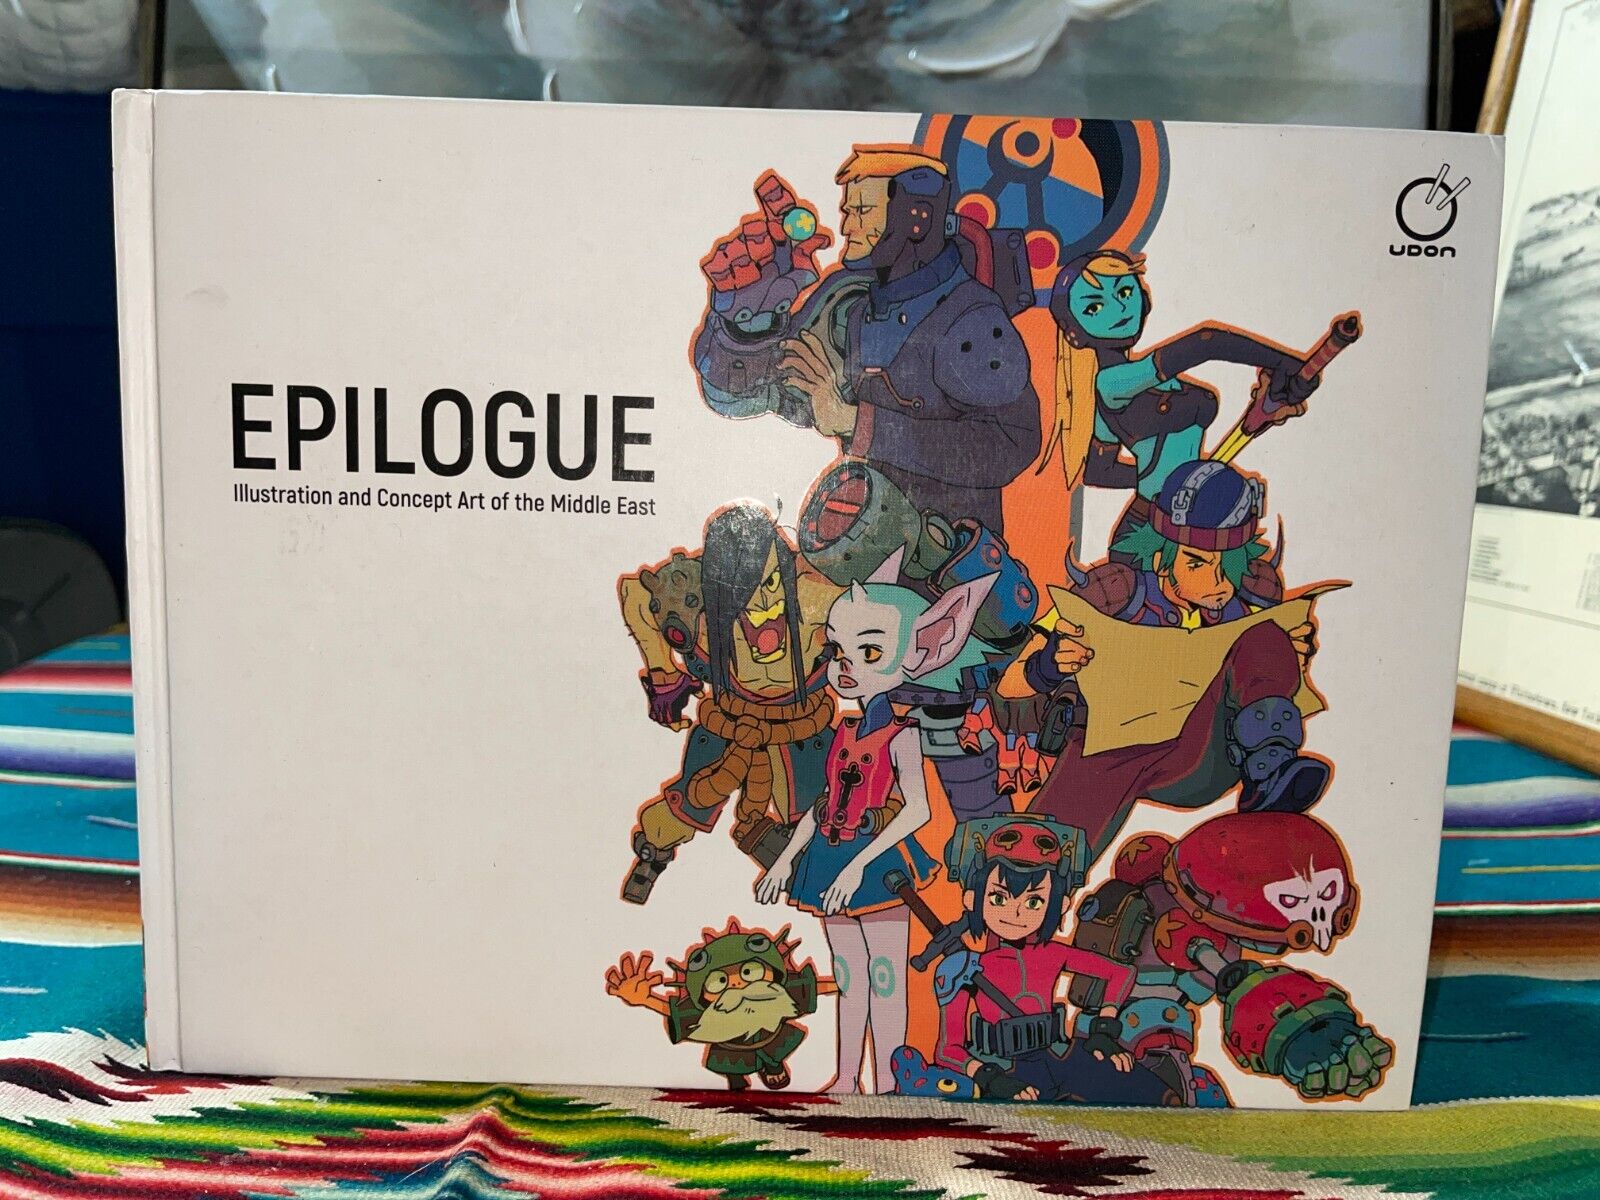 Epilogue Illustration and Concept Art of the Middle East Hardcover Book